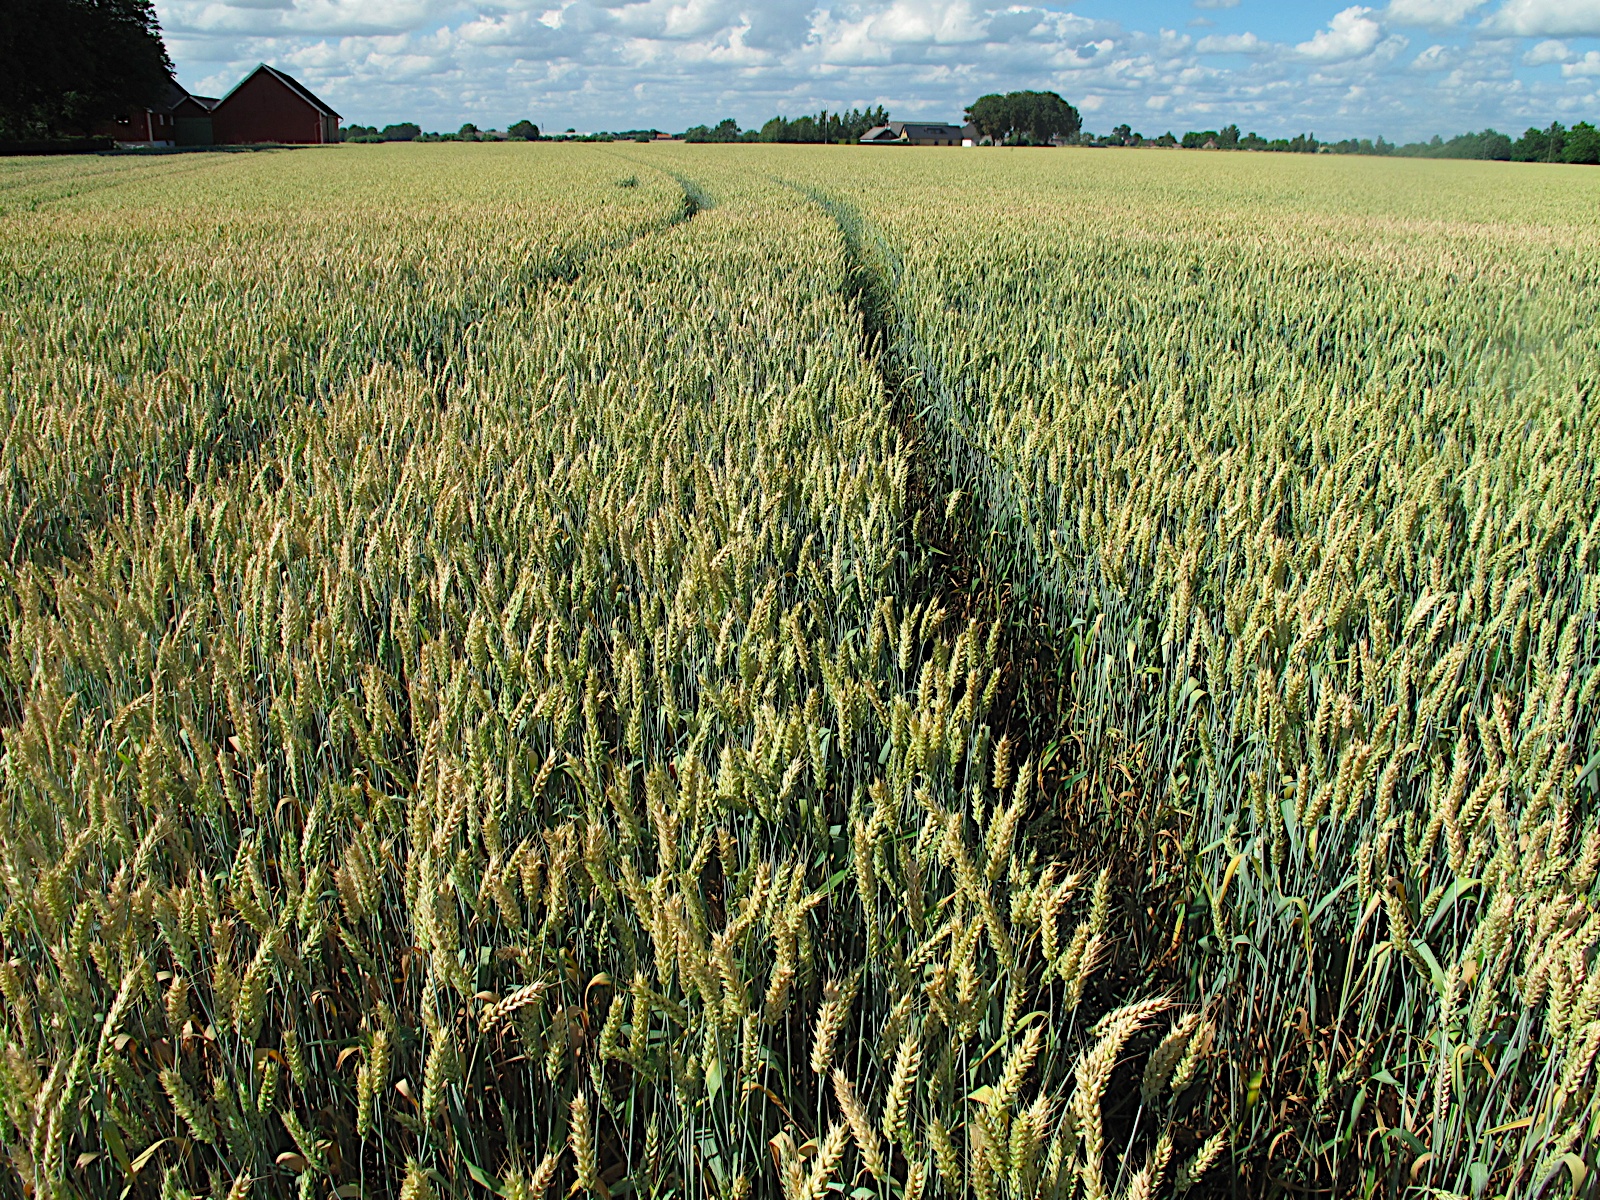 A large field of wheat; there are paths where the wheat has not been planted, in the background there is a house